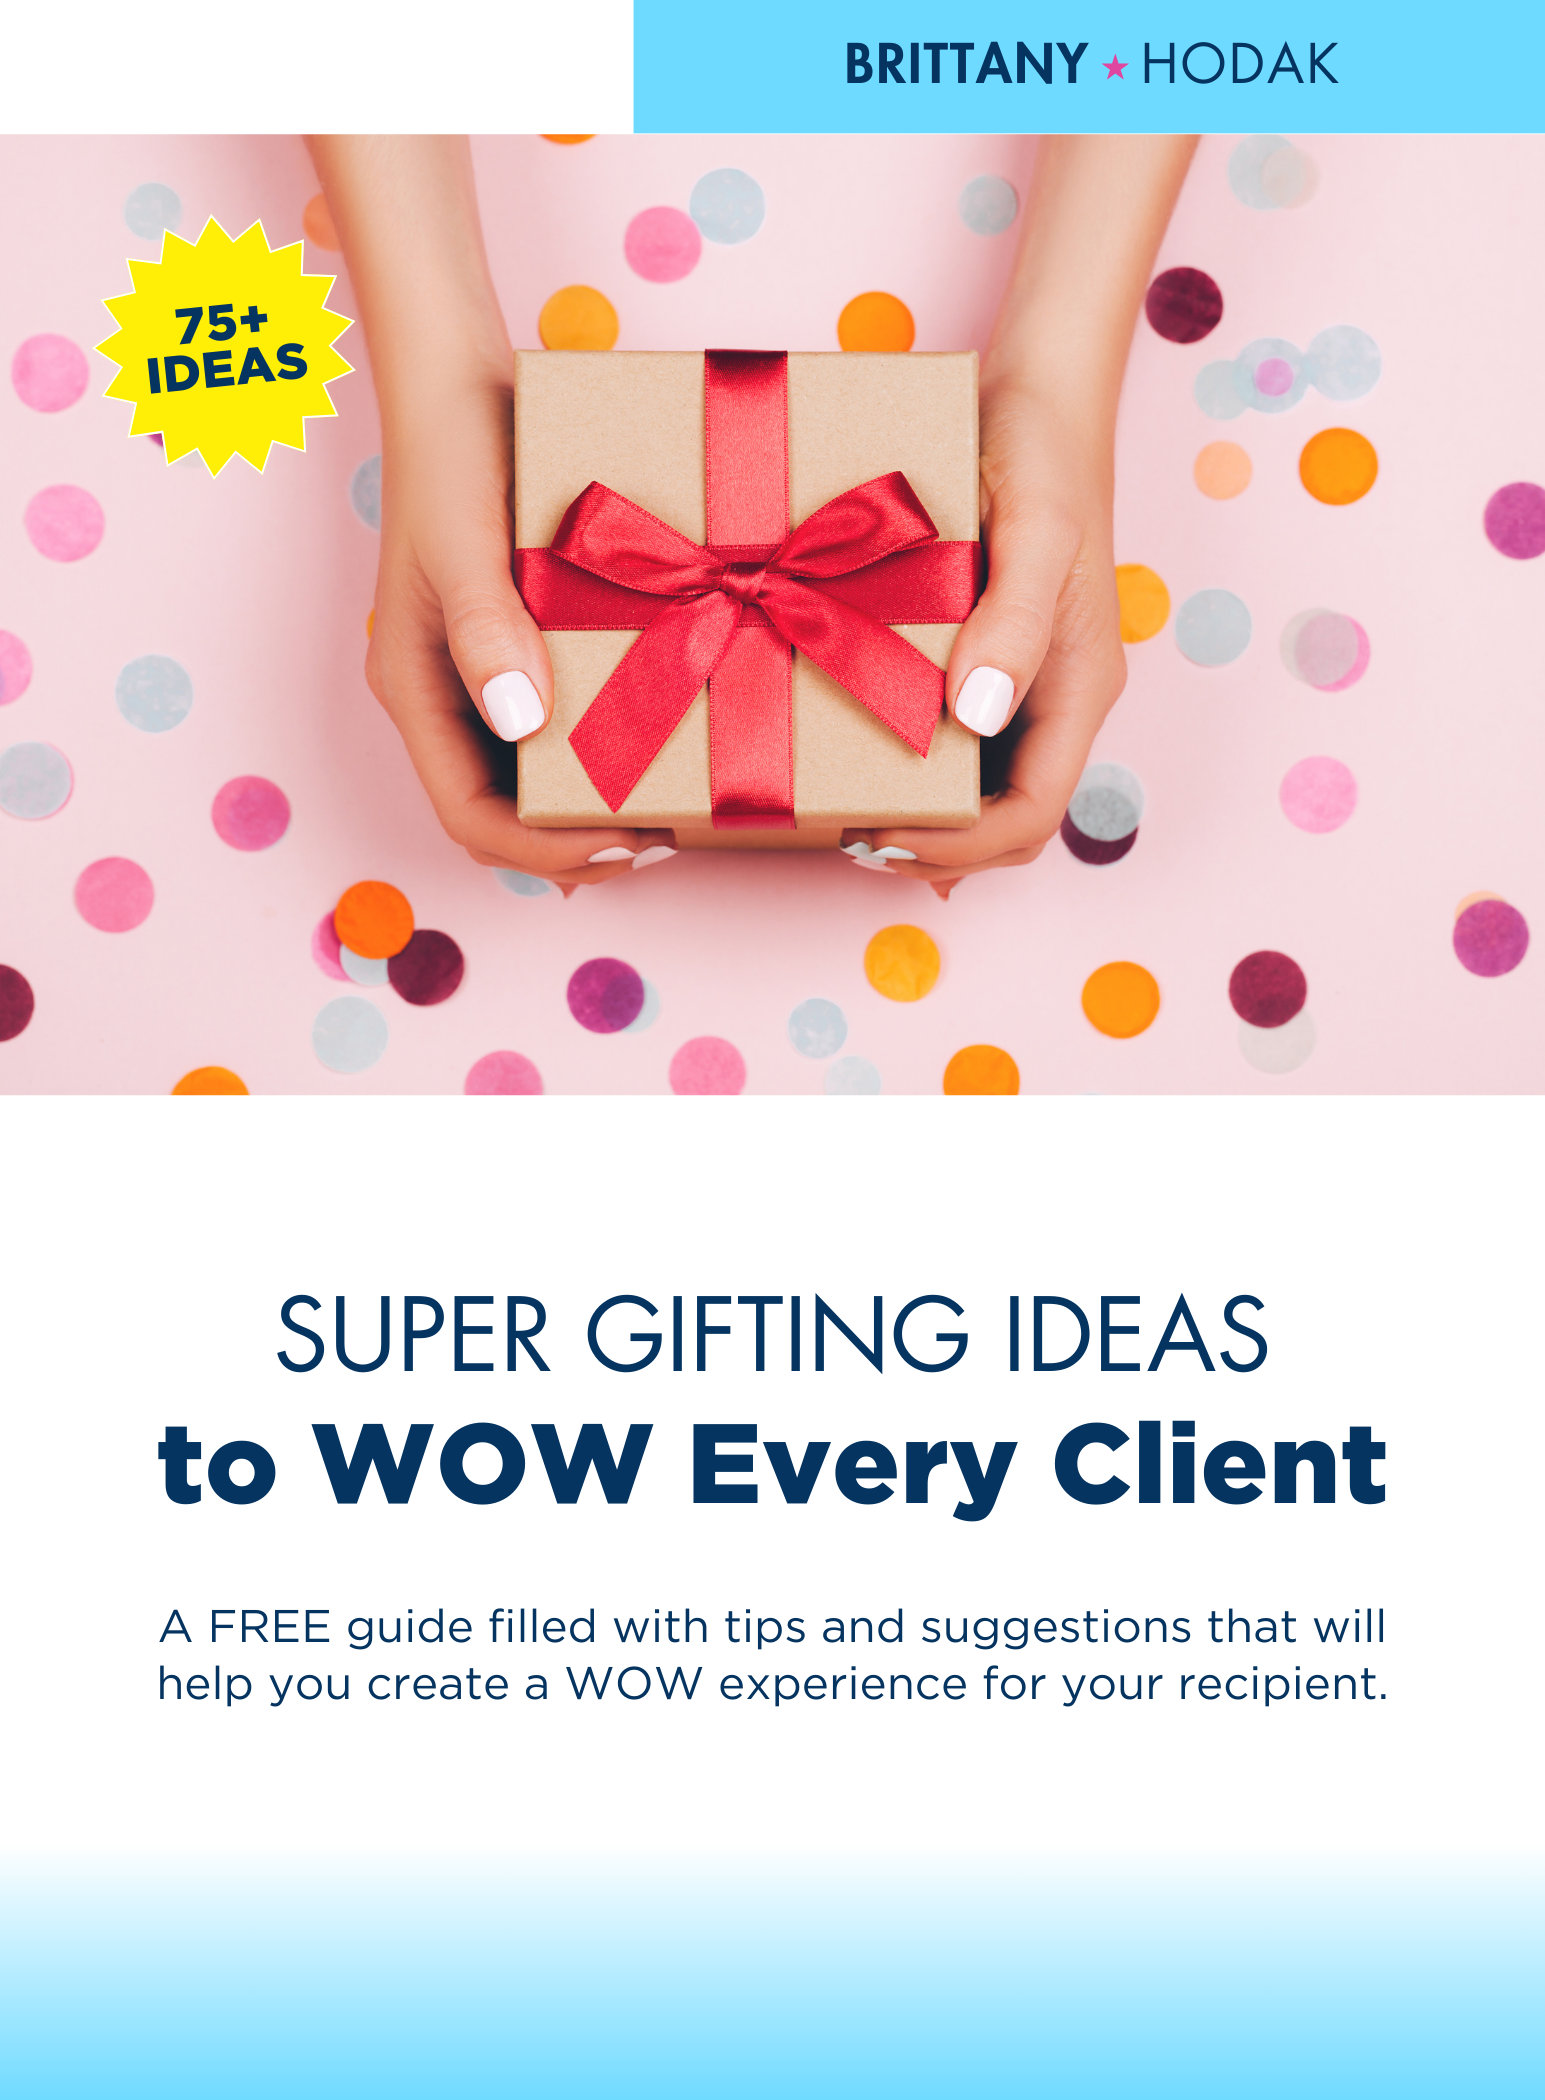 Super Gifting Ideas that WOW Every Client - Brittany Hodak